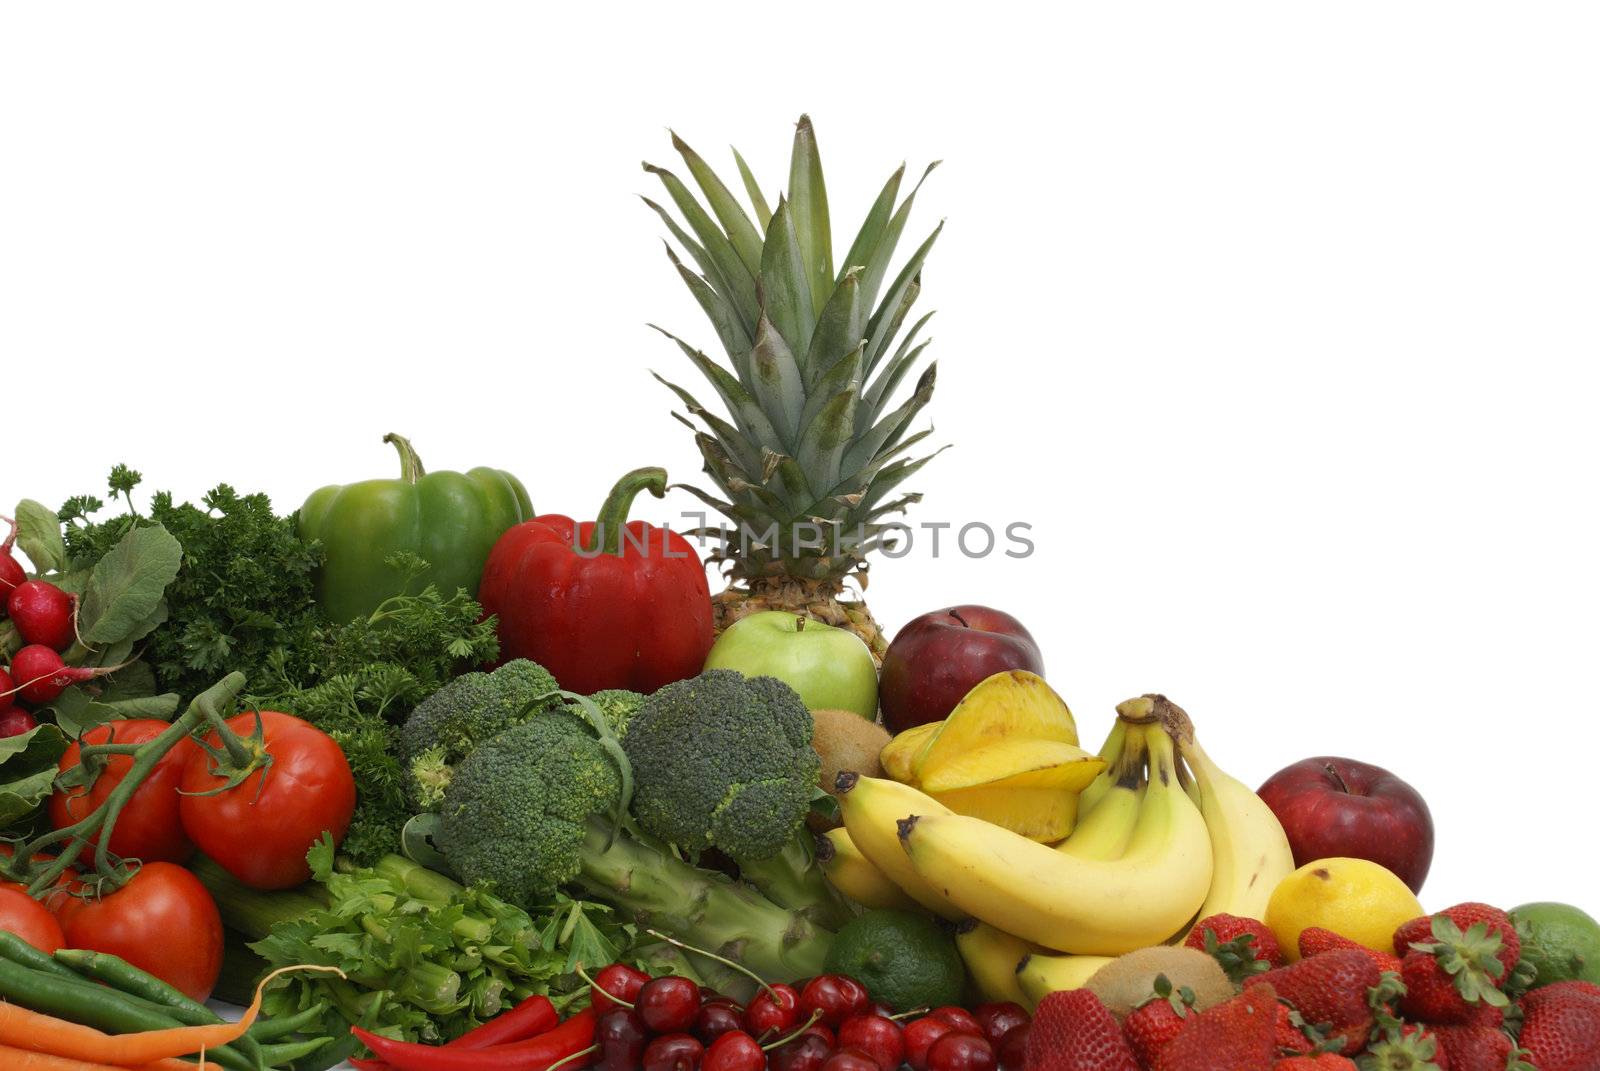 Fruits and Vegetable Arrangement by AlphaBaby